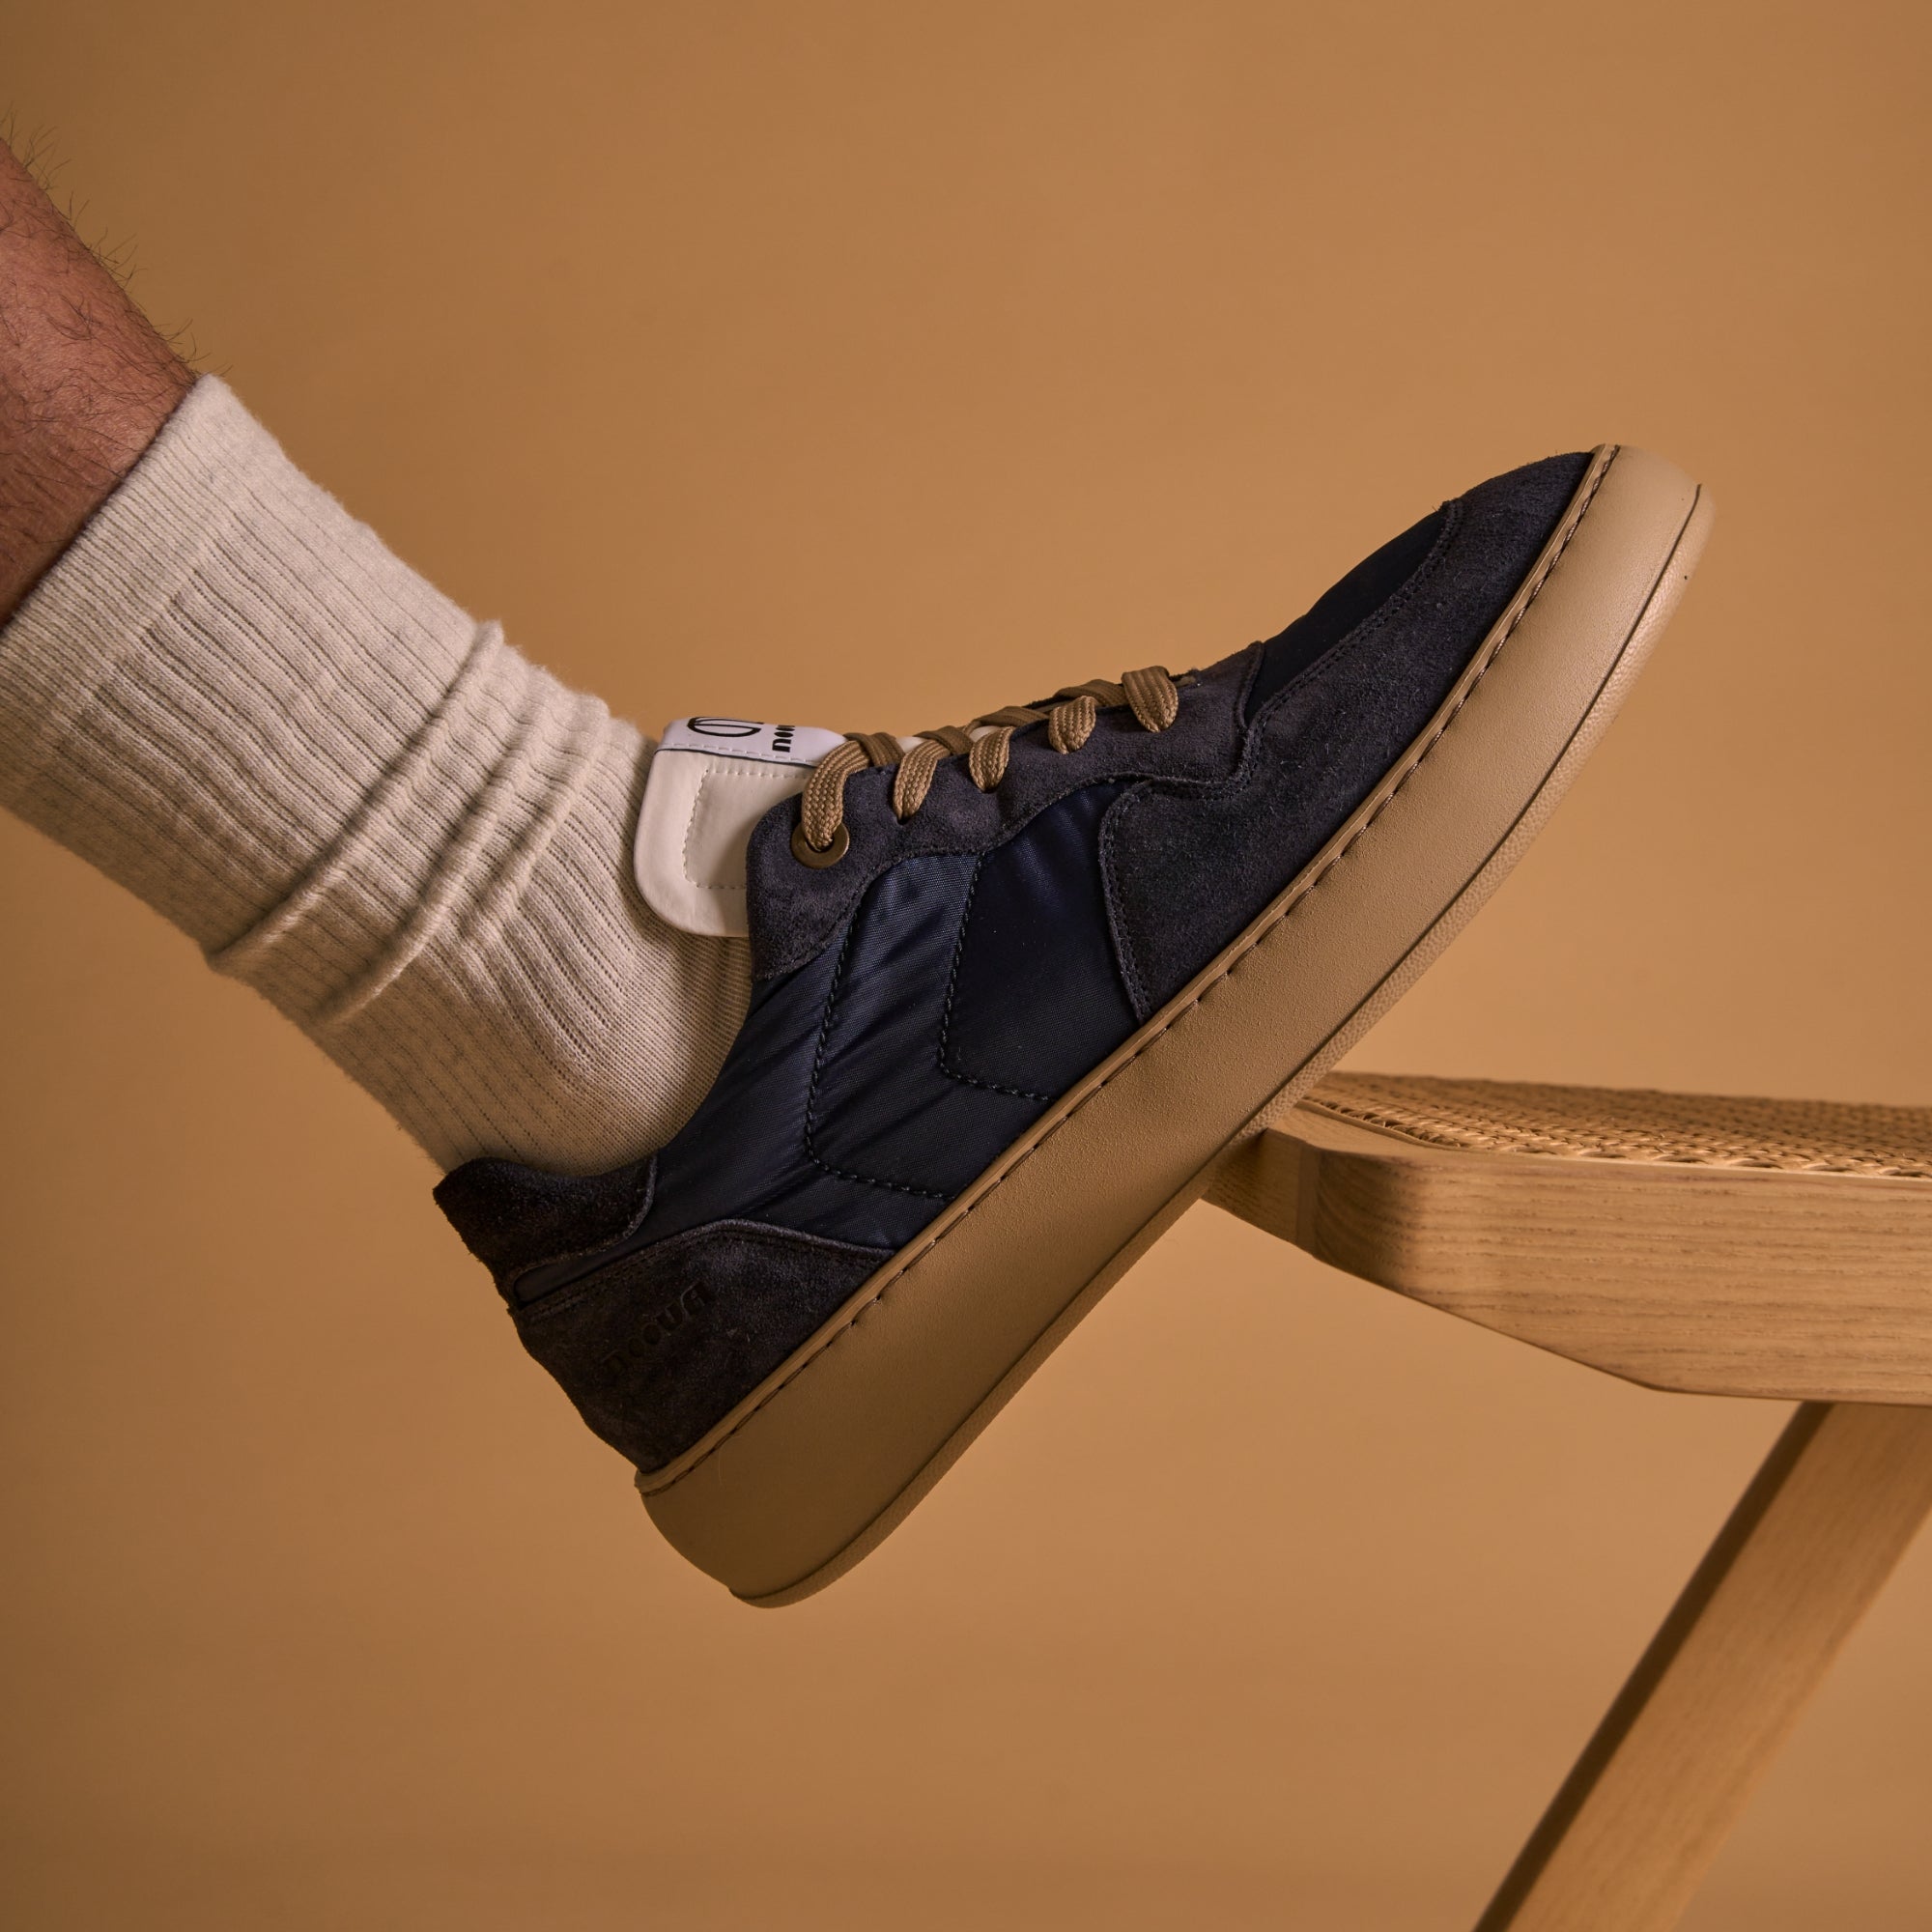 MAGIC 2611 LOW SNEAKER IN NAVY SUEDE AND REFLECTIVE NYLON  